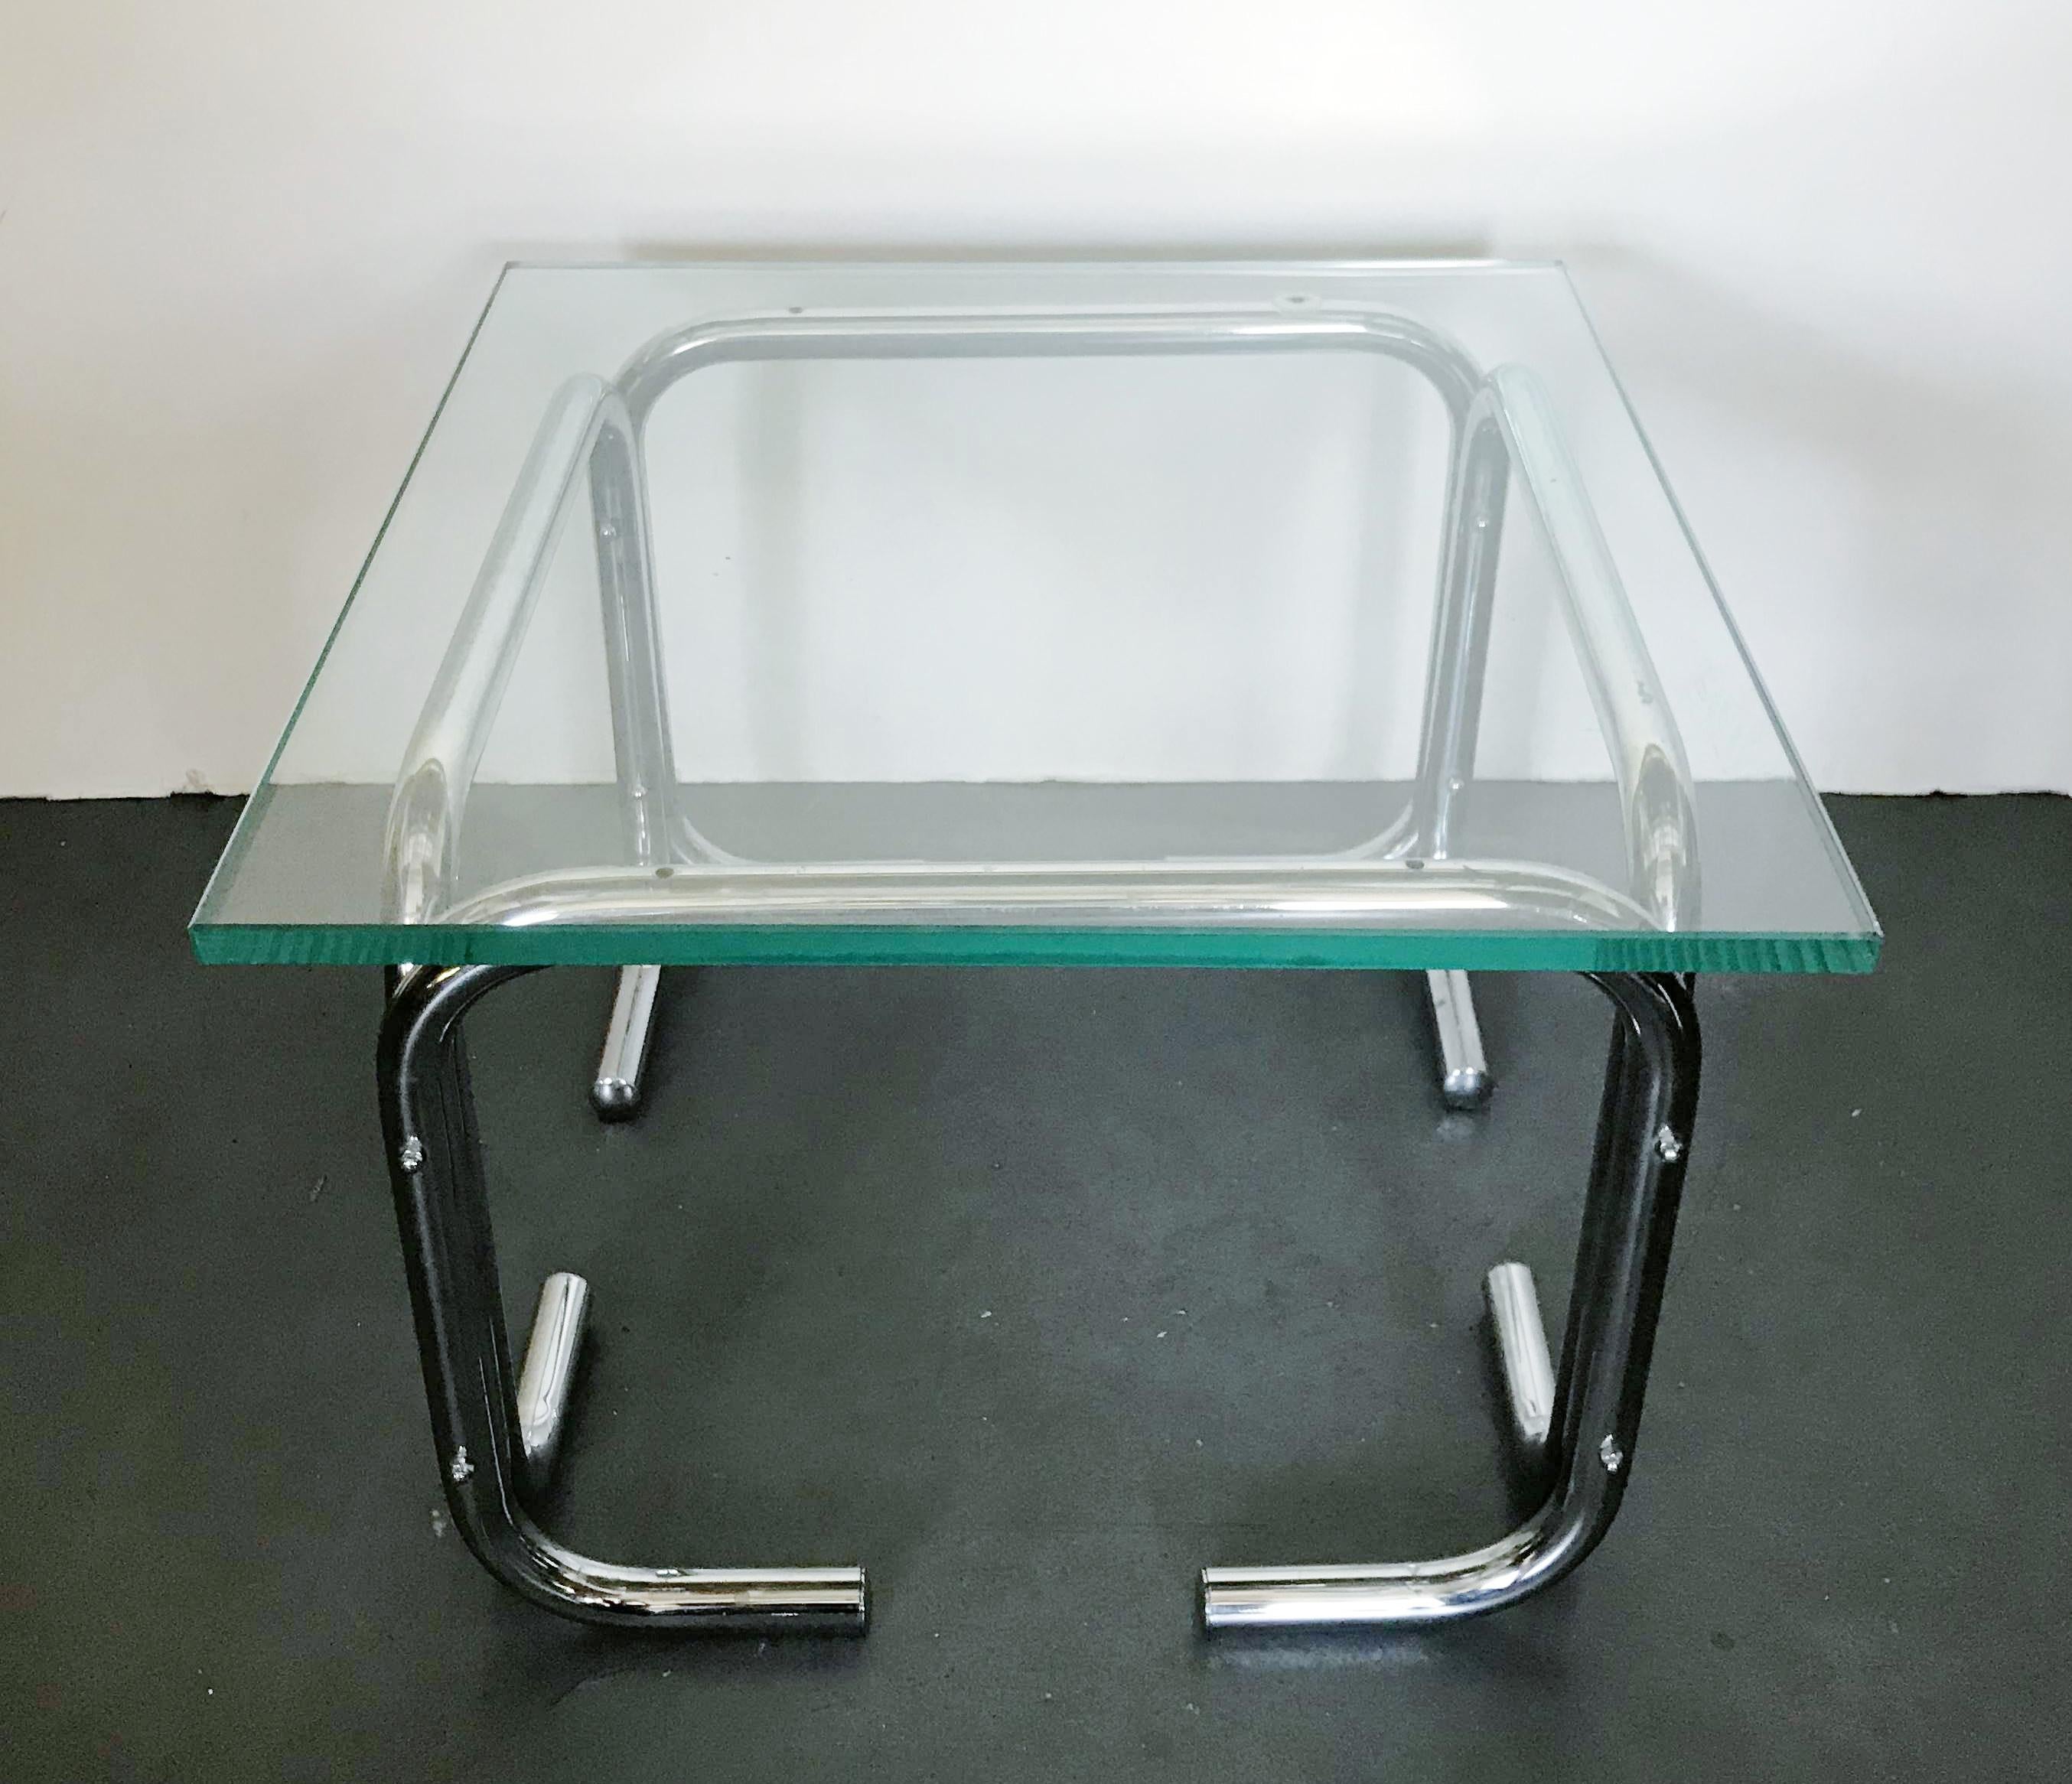 Vintage midcentury side table with tubular chrome base and thick square glass top / Made in the USA, circa 1970s
Measures: length 22 inches, width 22 inches, height 14.5 inches
1 available in stock in Palm Springs on FINAL CLEARANCE SALE for $649